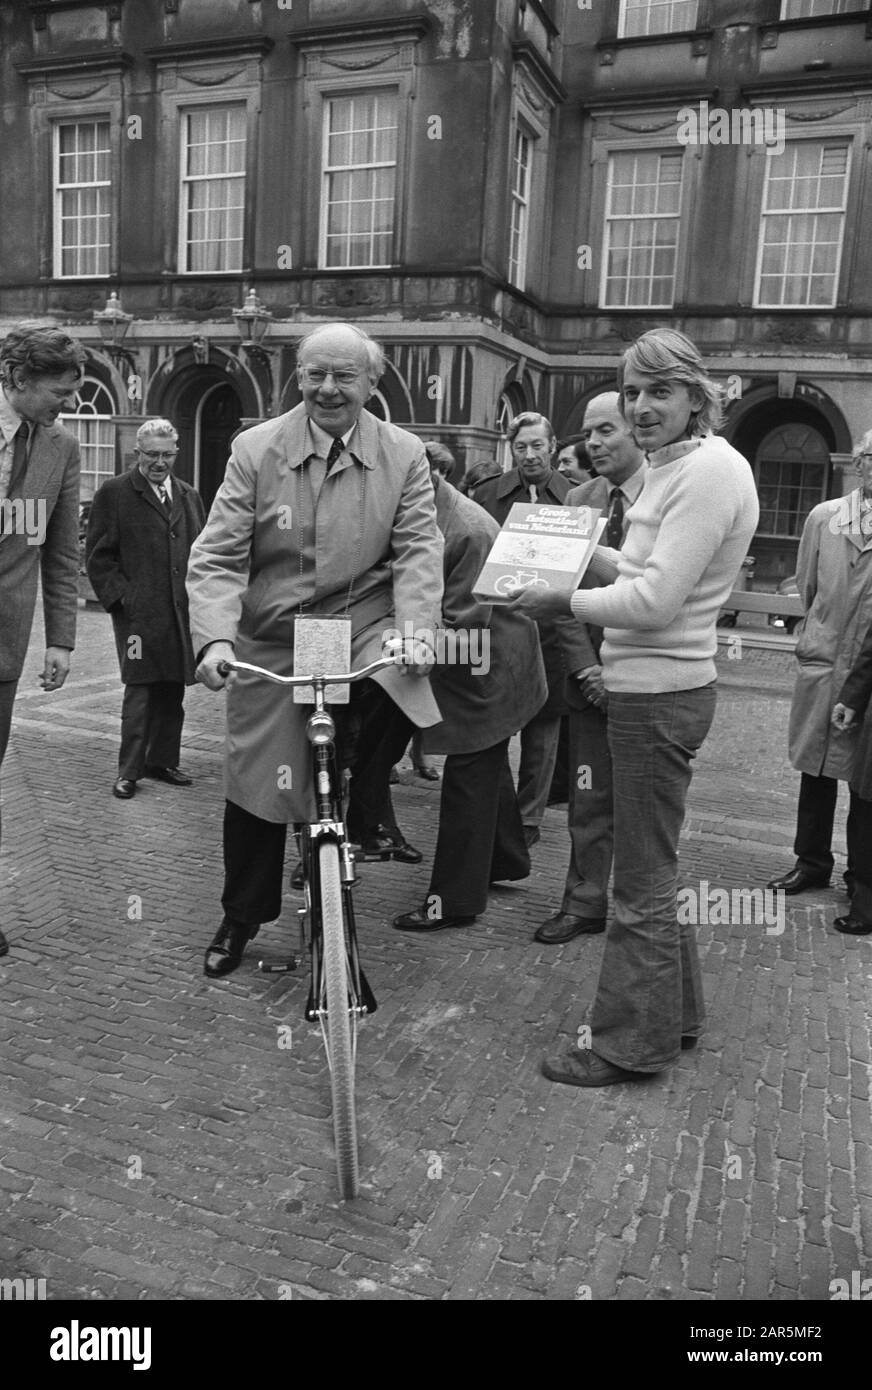 Chamber Chairman Vondeling on the bike with new bicycle atlas at Binnenhof Date: 28 October 1975 Location: The Hague, Zuid-Holland Keywords: Chamber chairmen, atlases, bicycles Person name: Vondeling, Anne Stock Photo